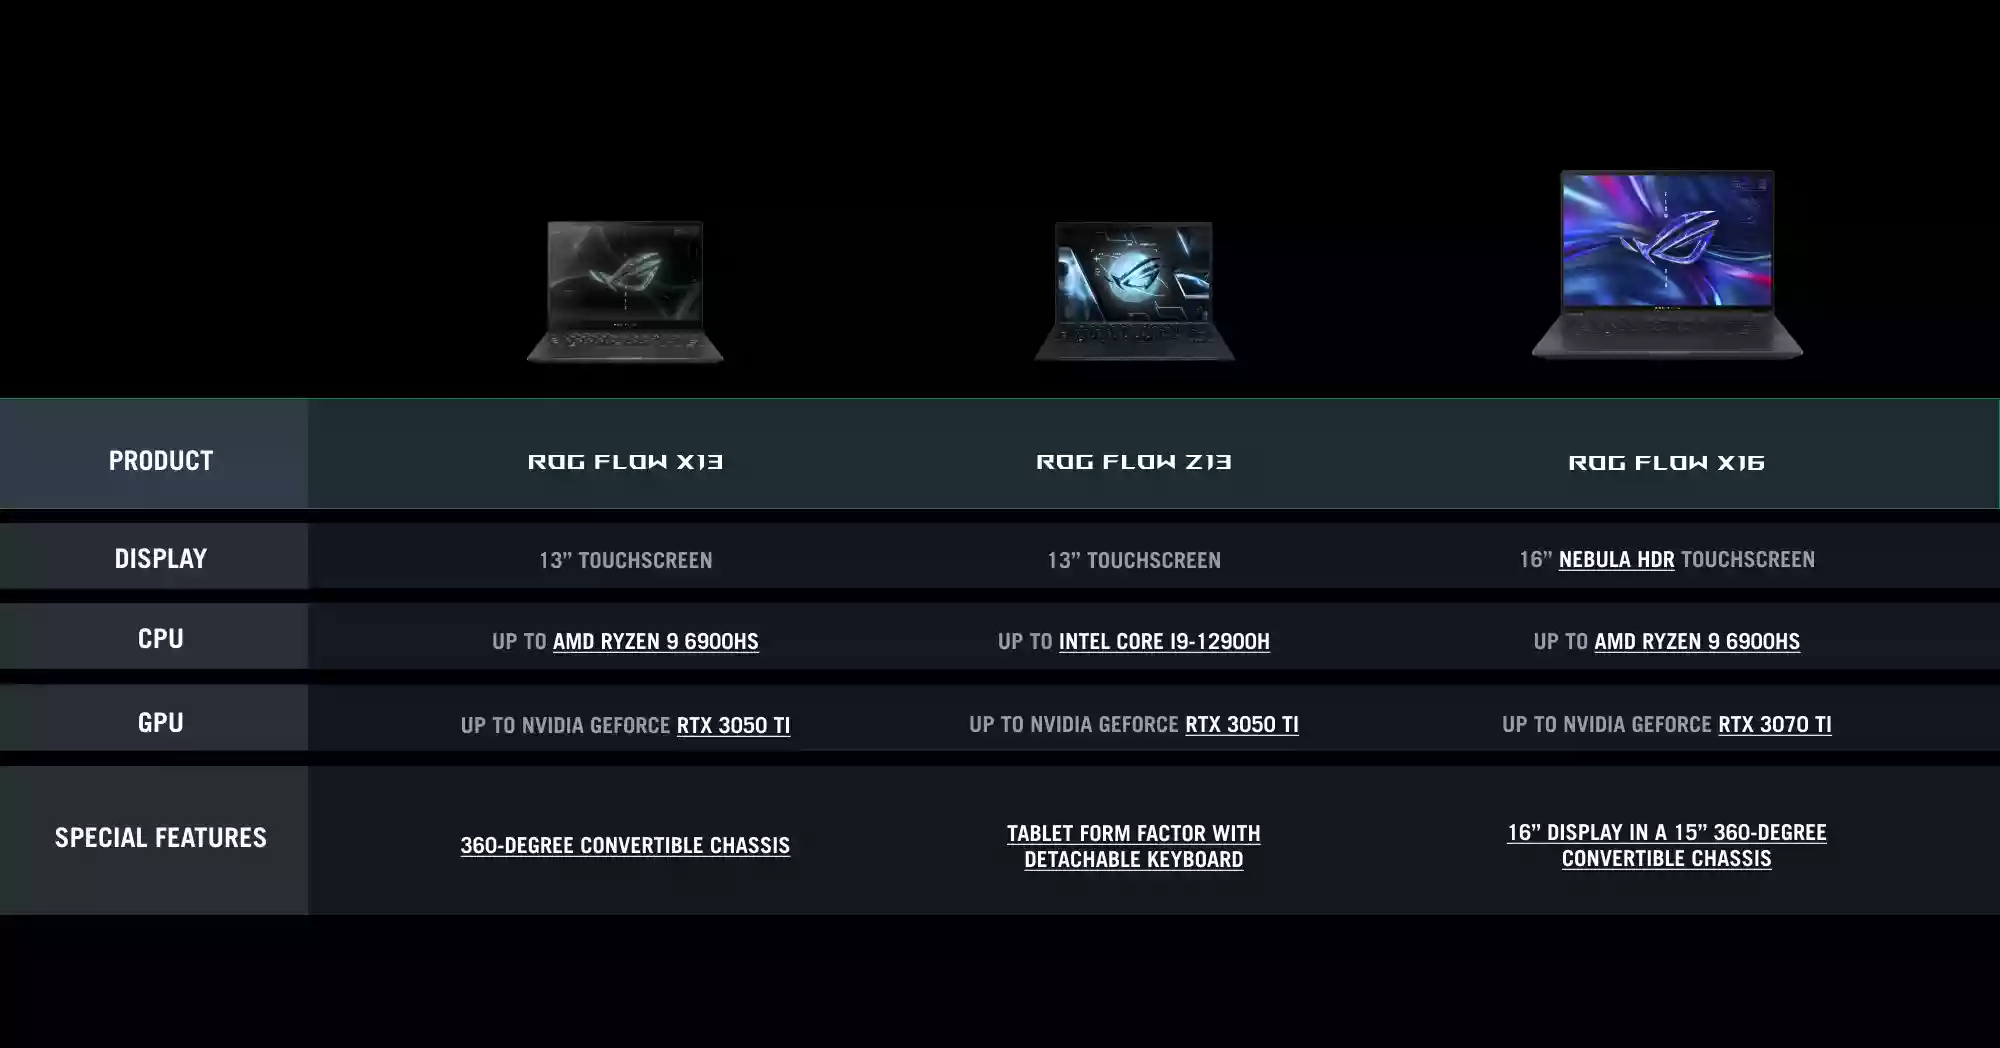 A table showing the differences between the ROG Flow X13, Z13, and X16 devices..